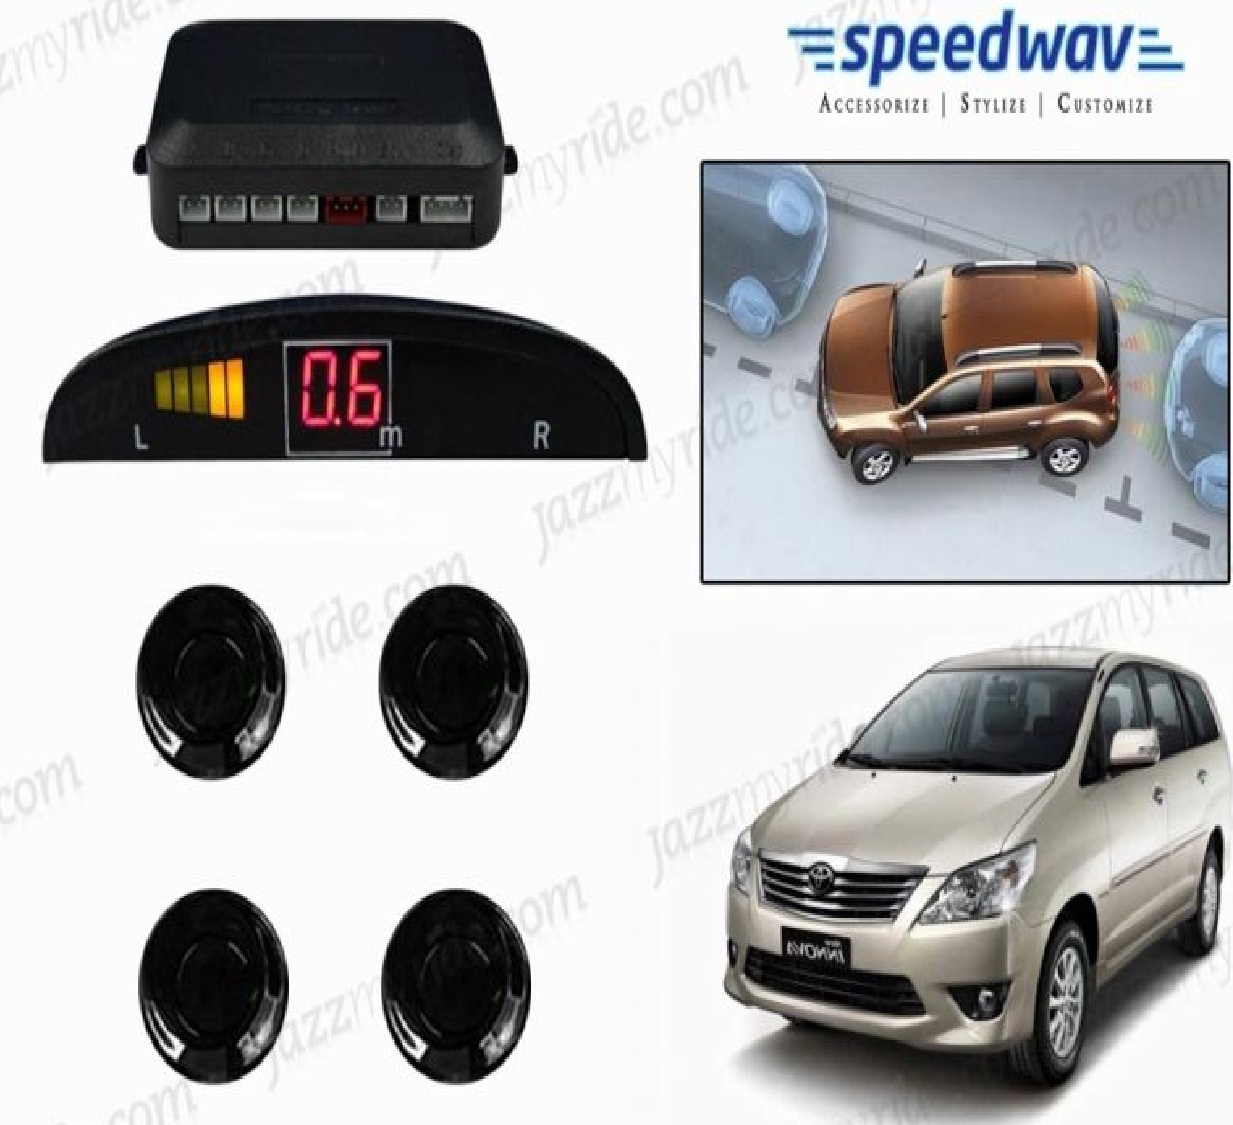 8 Car Accessories That Make Your Toyota Innova Long Drive Ready - Rediff.com